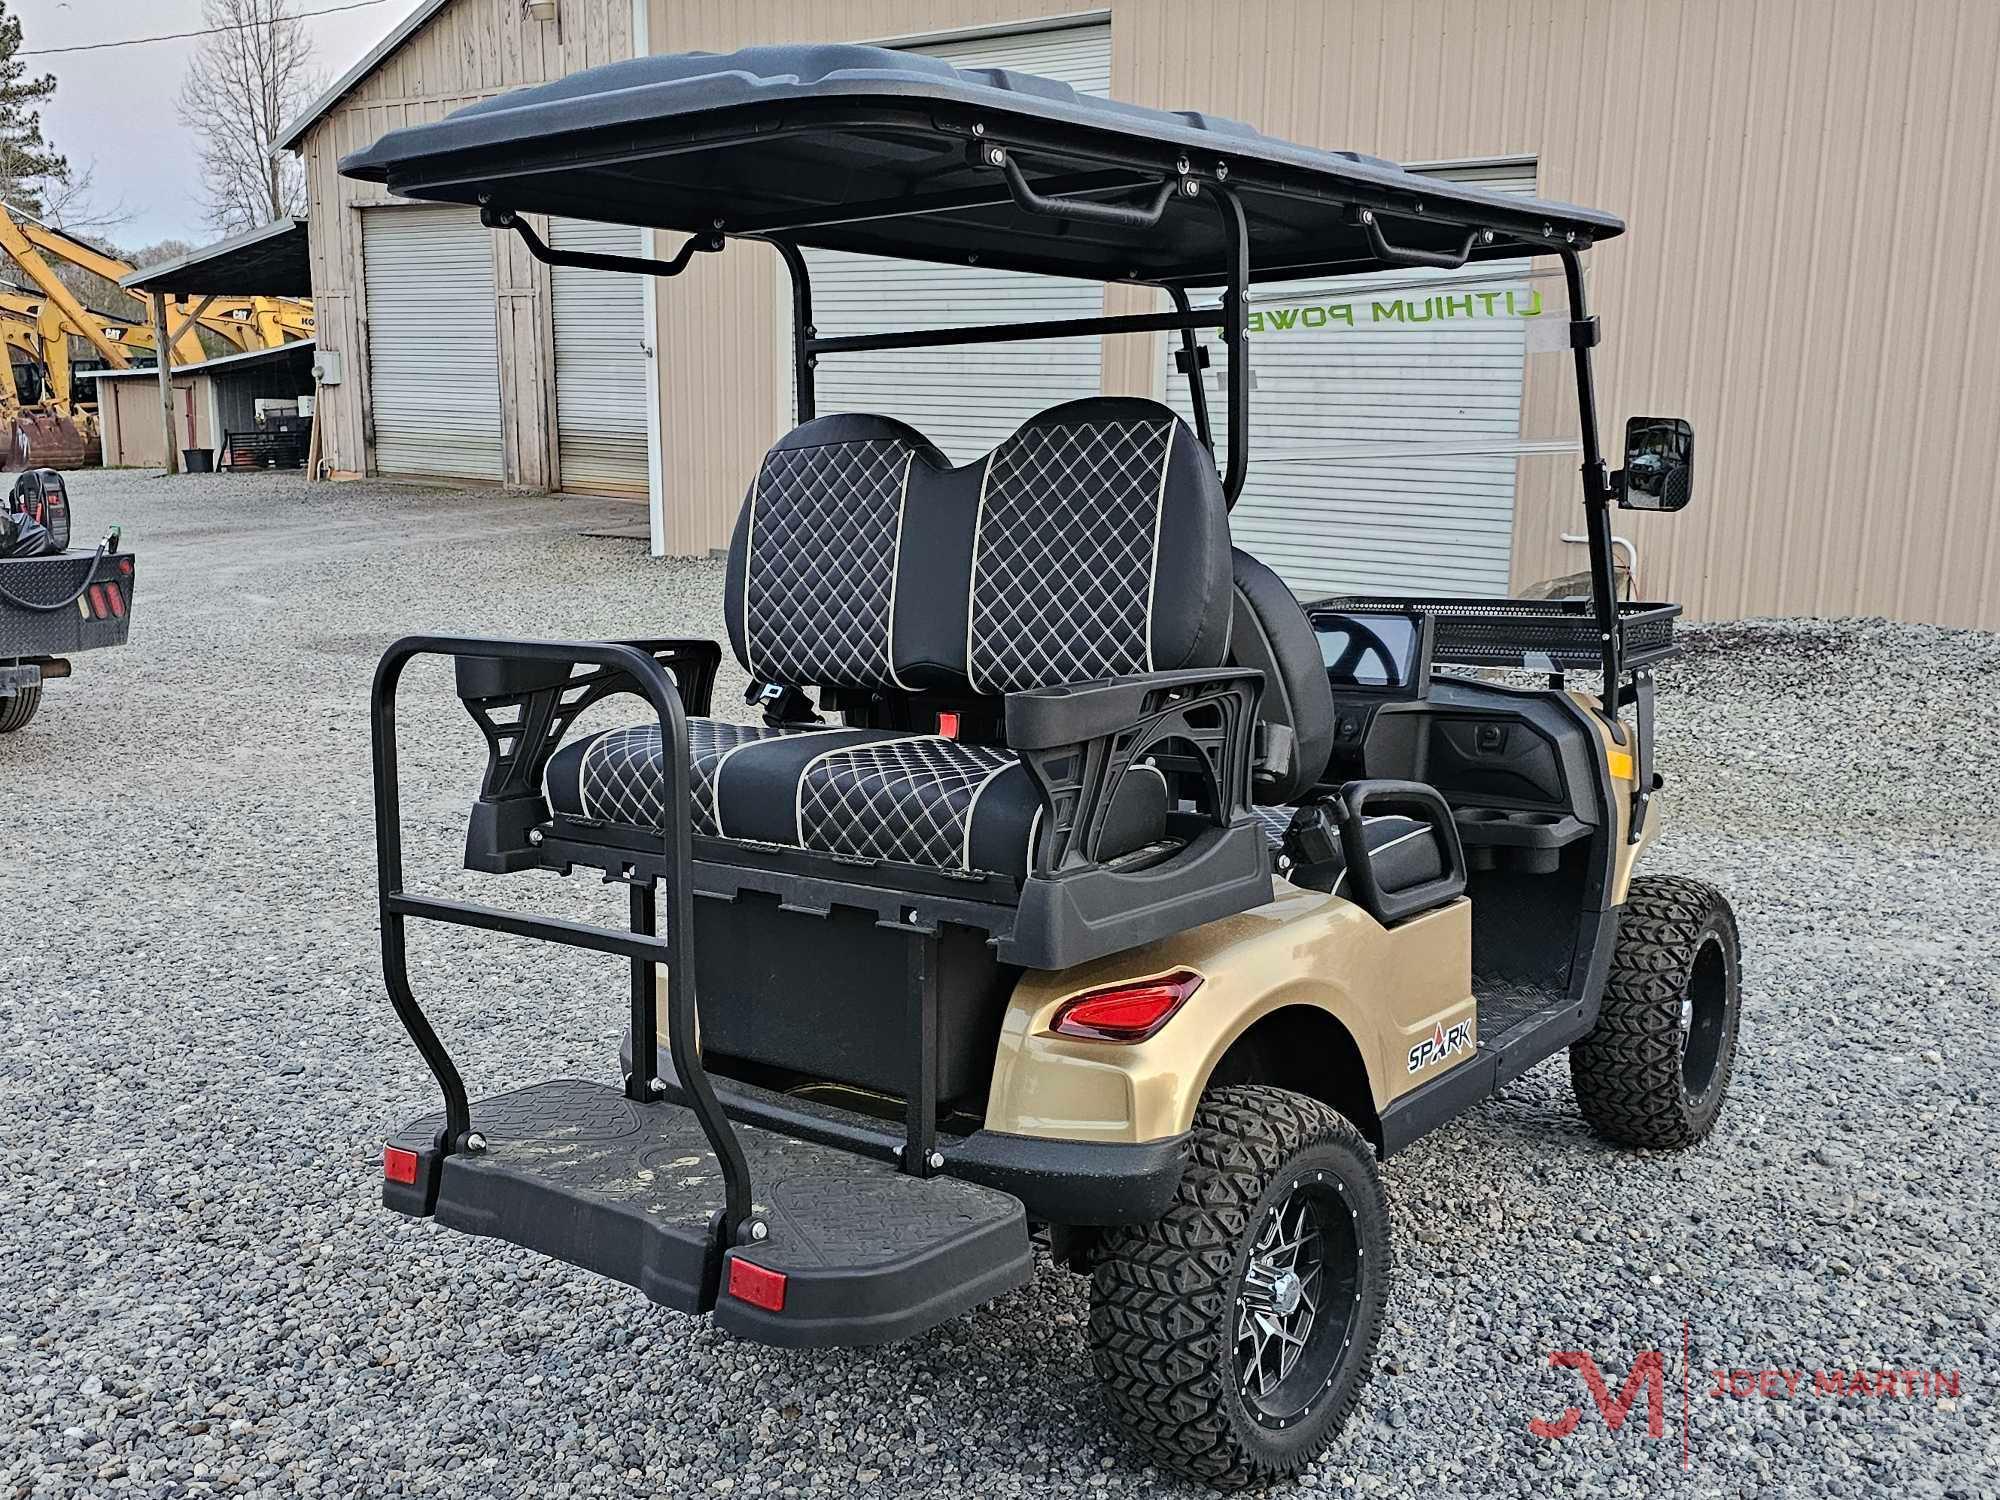 NEW 4-SEATER 48V ELECTRIC GOLF CART